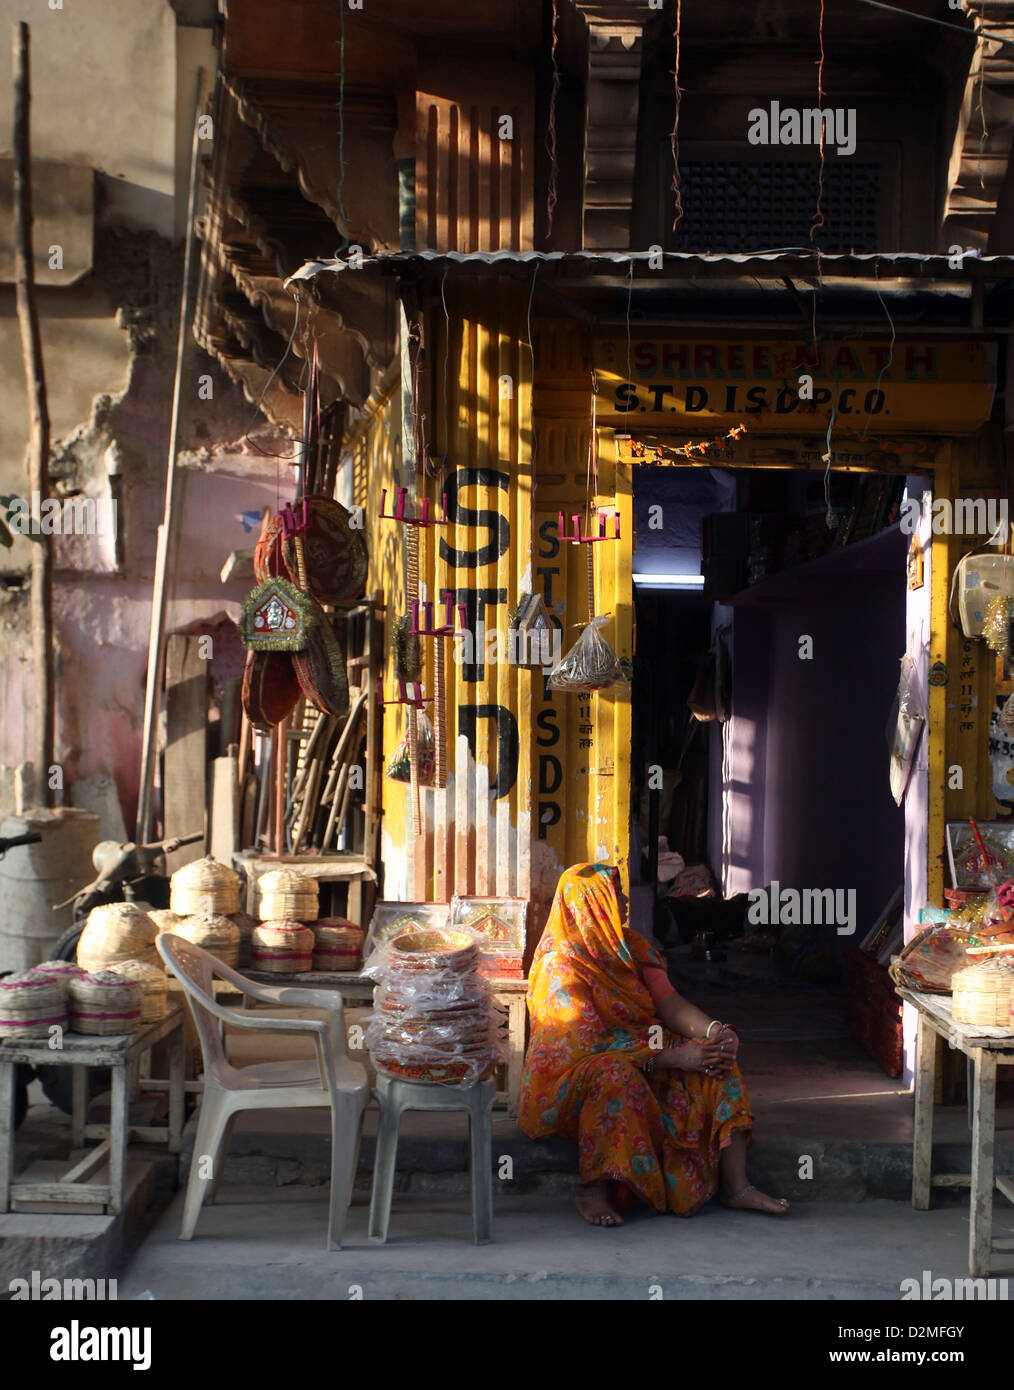 General view of a woman pictured in the clocktower market of Jodhpur, Rajastahan, India Stock Photo